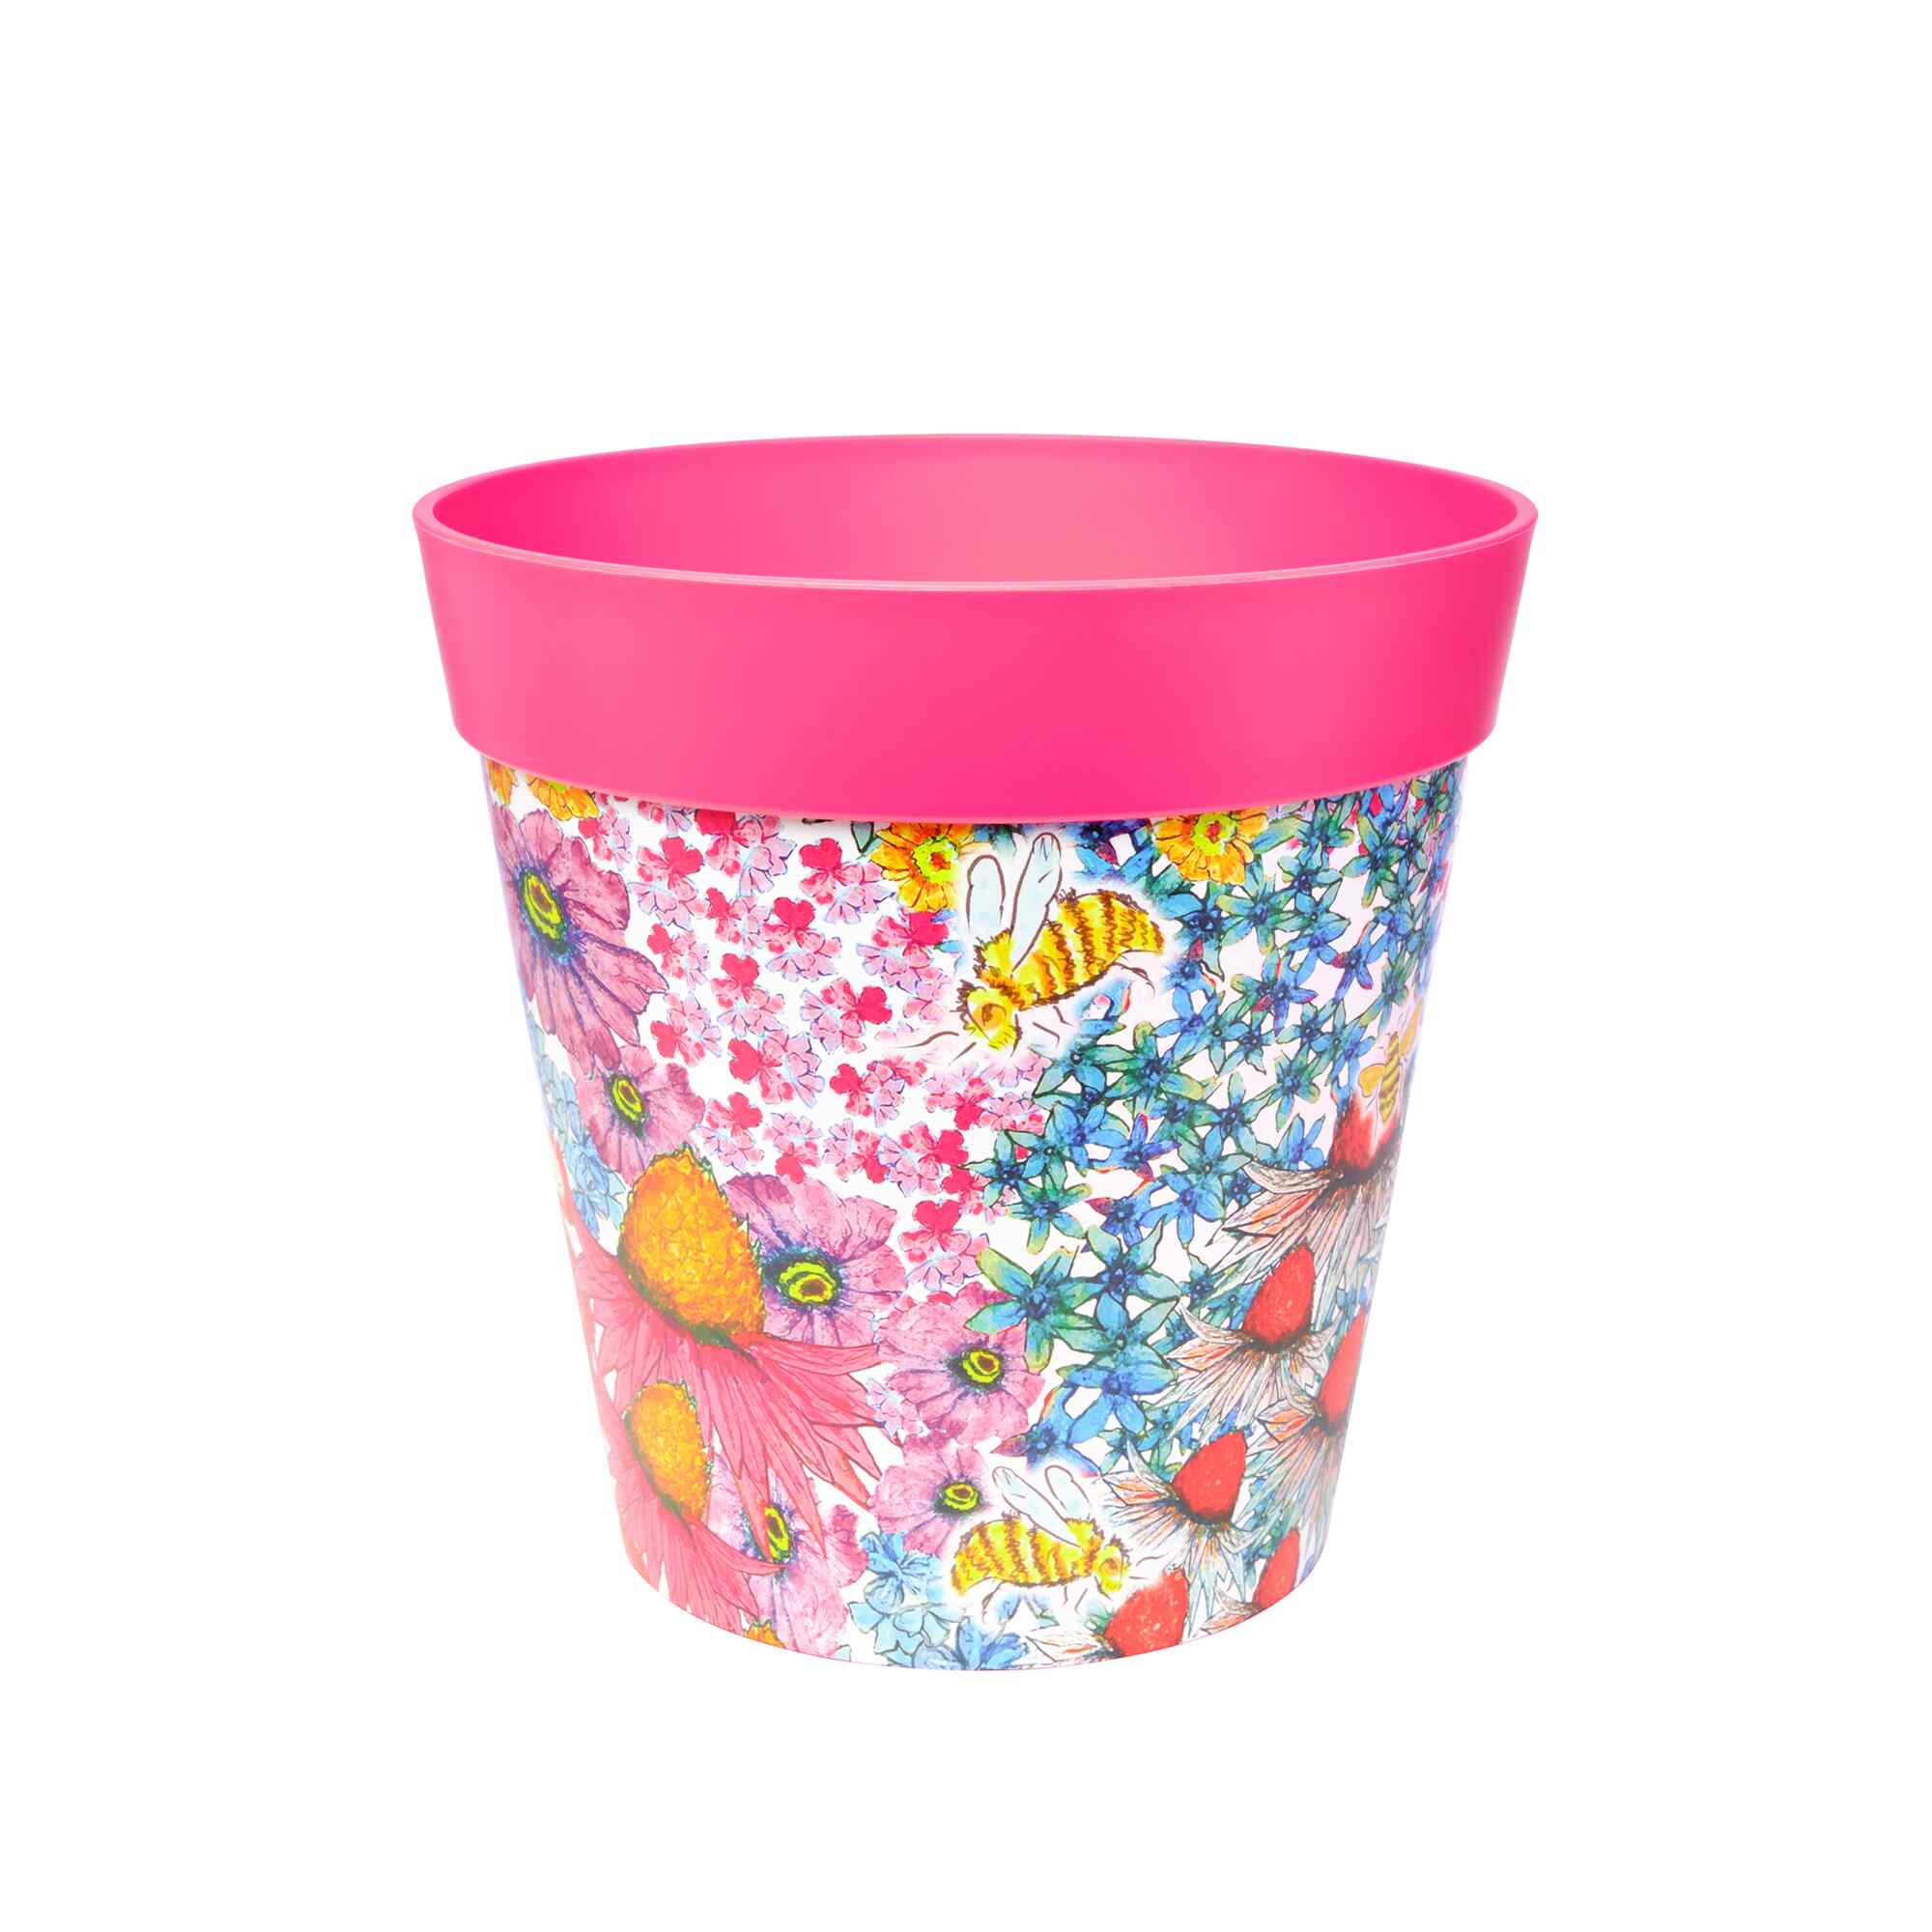 Picture of Large 25cm Plastic Pink Flowers and Bees Pattern Indoor/Outdoor Flower Pots 